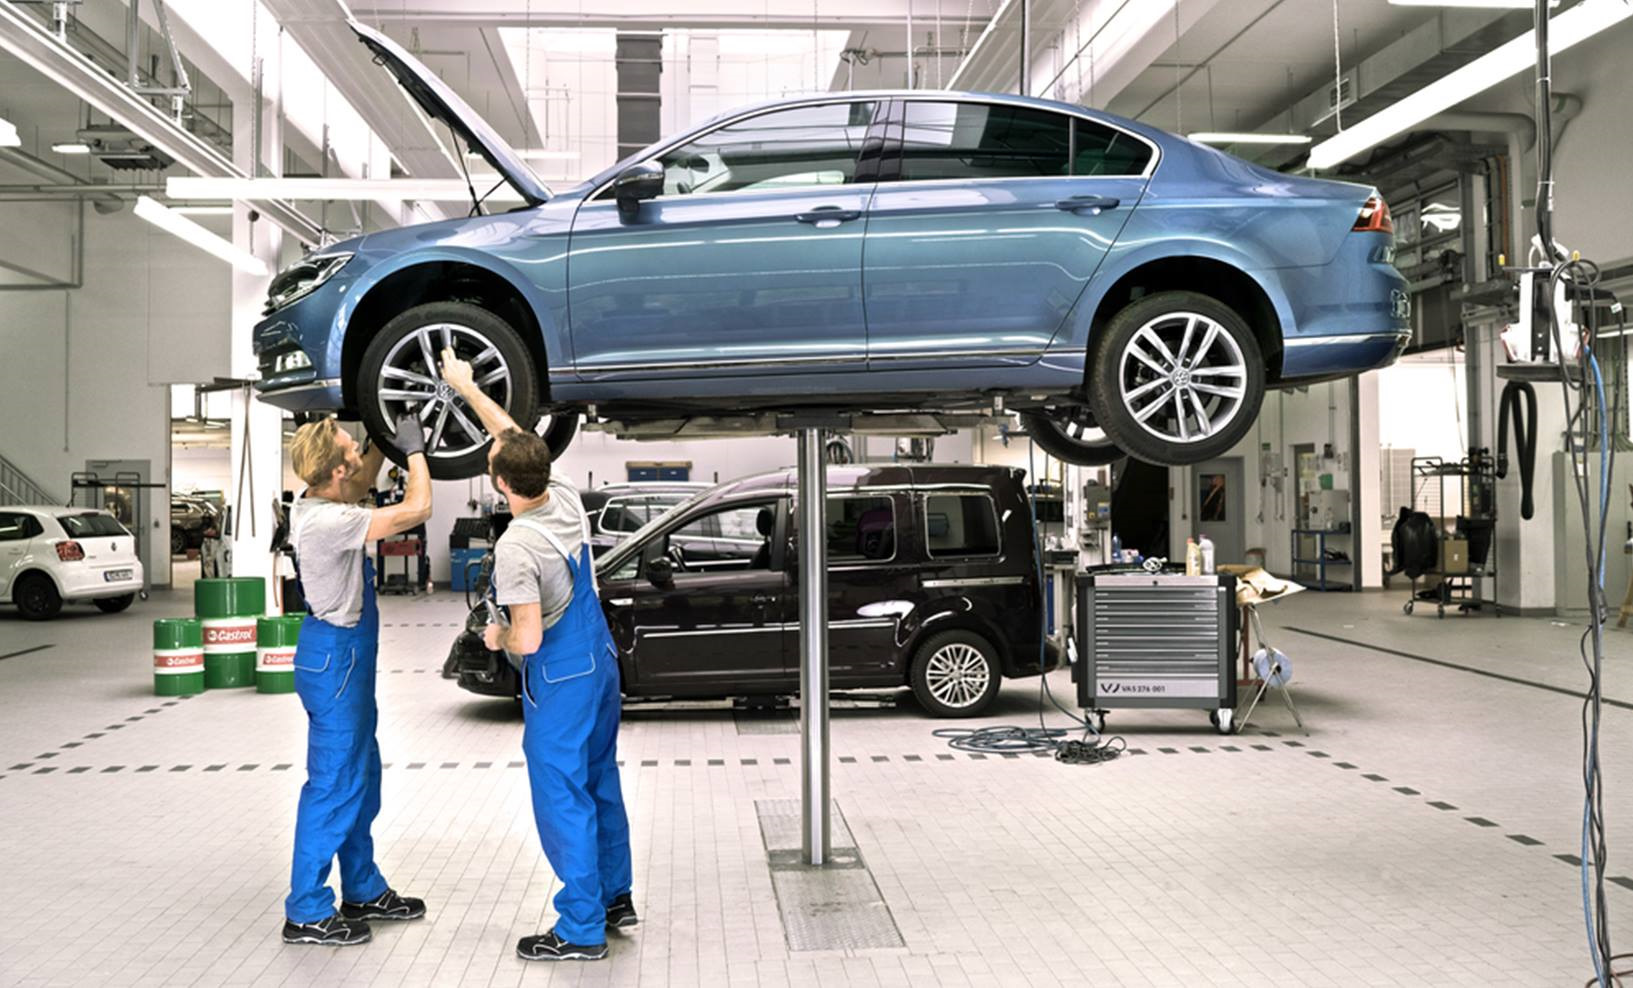 How much does it cost to maintain a Volkswagen servicing in Dubai?